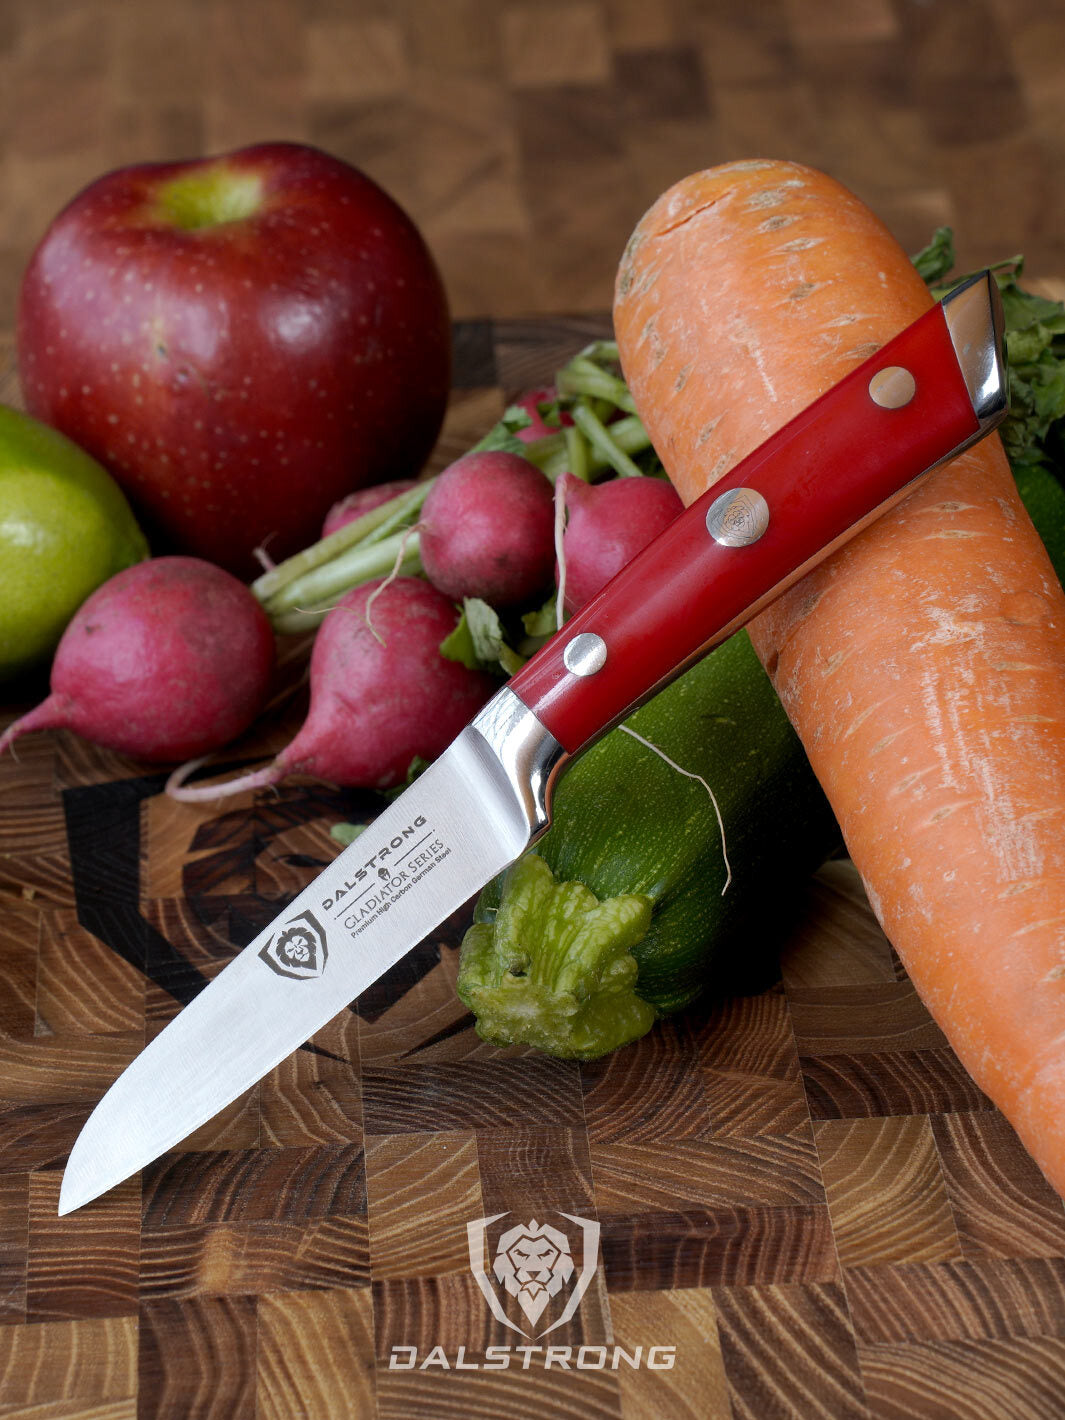 Dalstrong gladiator series 3.5 inch paring knife with red handle and vegetables on a cutting board.